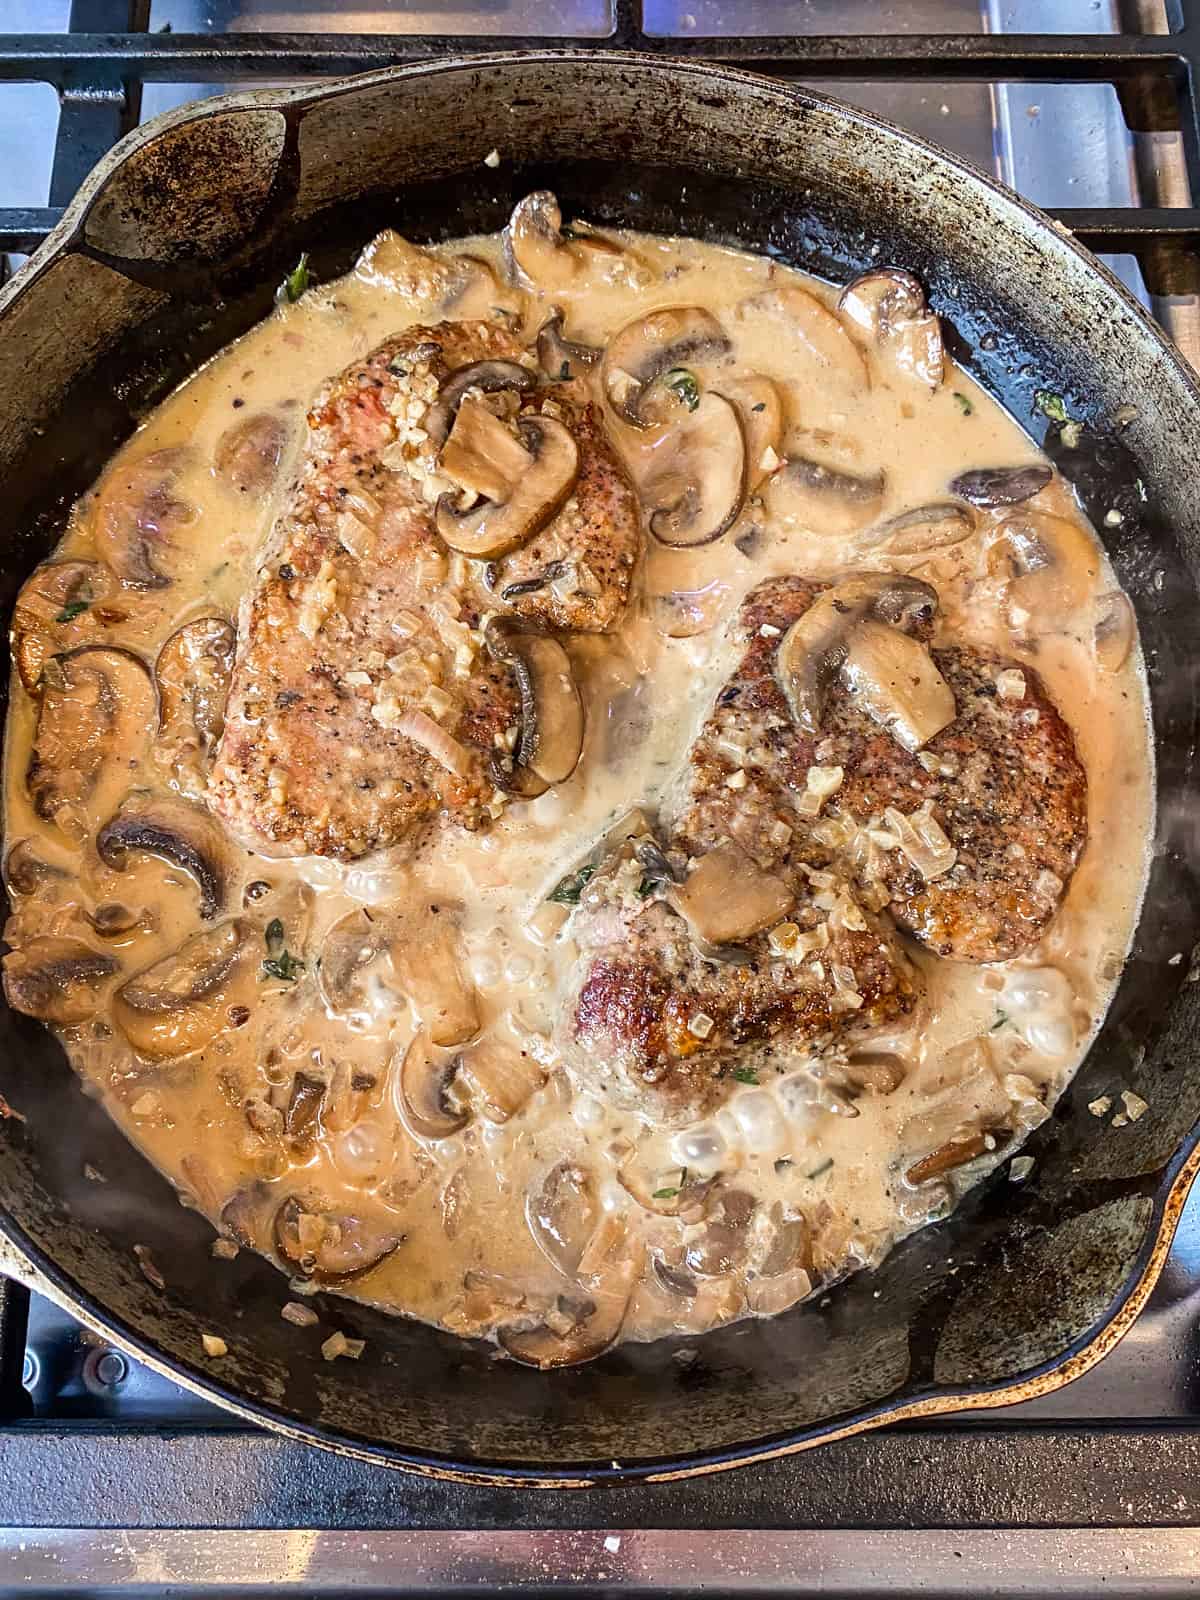 Add the seared steaks back into the creamy marsala sauce and baste the steaks with the sauce.